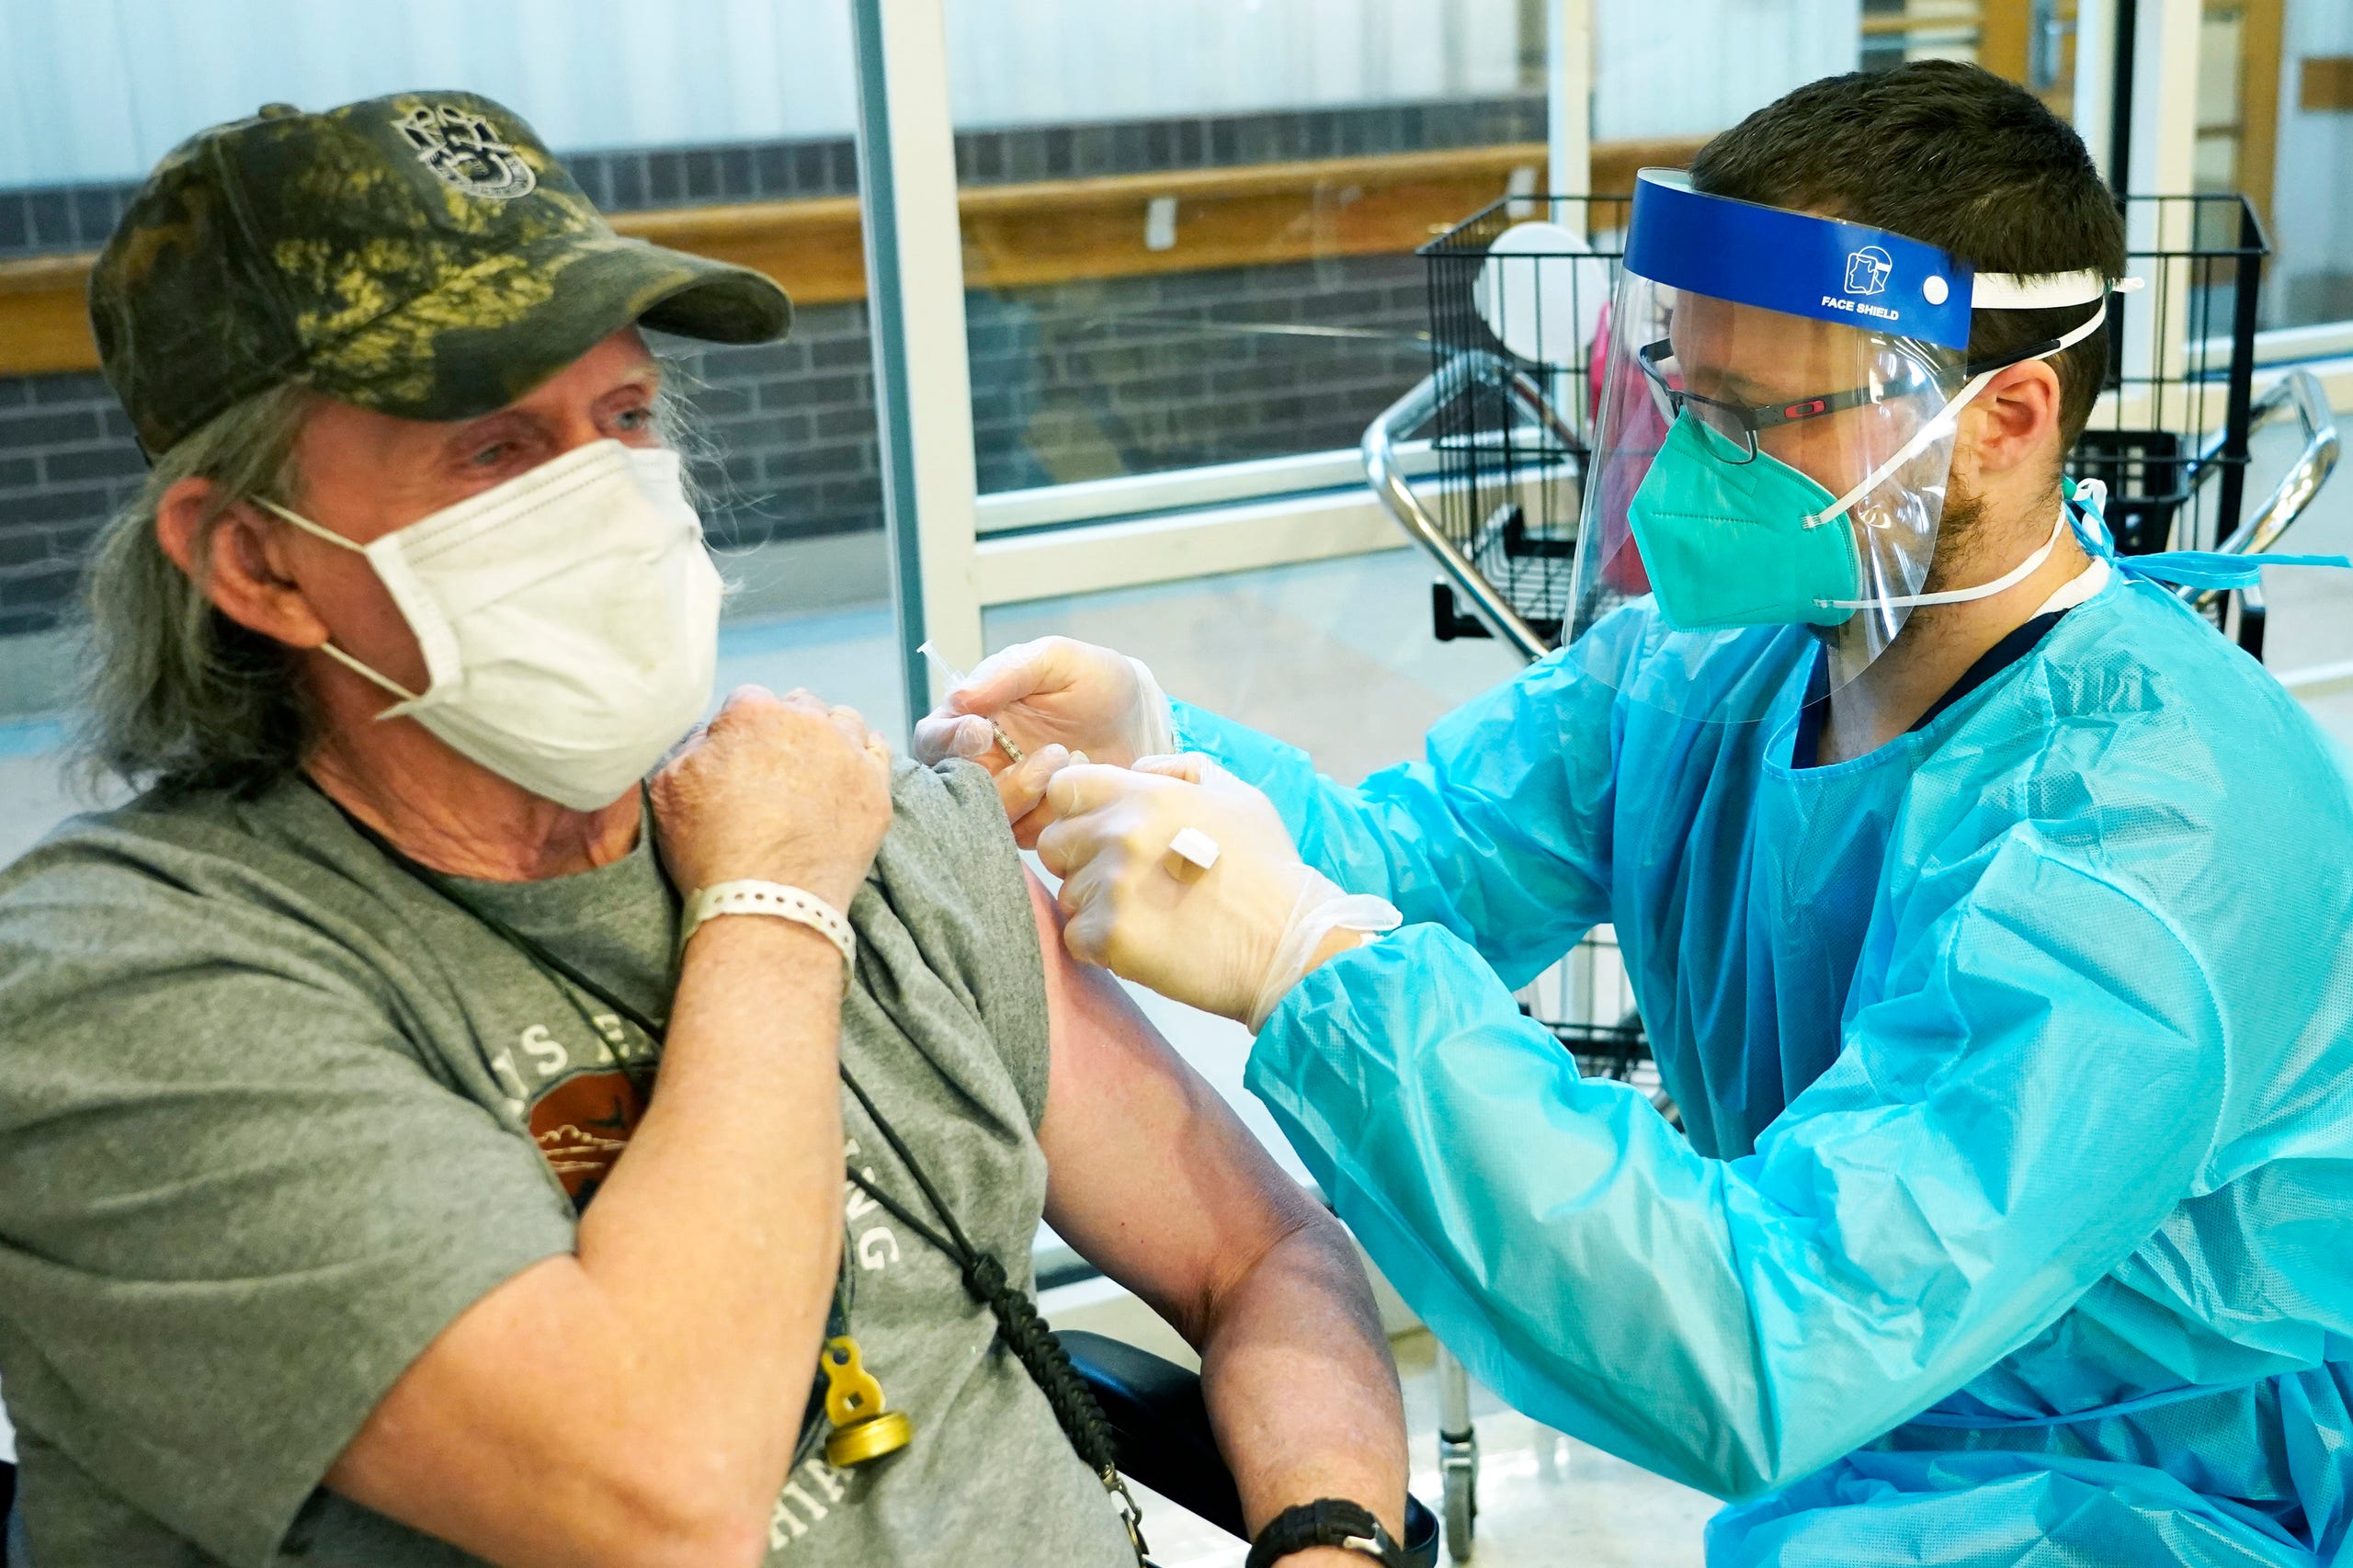 James Hill, 69, who served separate stints in both the Army and Navy, left, holds his sleeve as Brent Myers, a CVS pharmacist, readies to administer the Pfizer COVID-19 vaccination, at the Mississippi State Veterans Home in Jackson, Miss., Jan. 9, 2021. Hill was among the first residents to receive the Pfizer covid vaccination. Residents and staff at two of the four veterans homes were inoculated on Saturday with the vaccinations planned for the two other homes next week. The veterans homes were among the hardest hit senior living facilities by the virus.